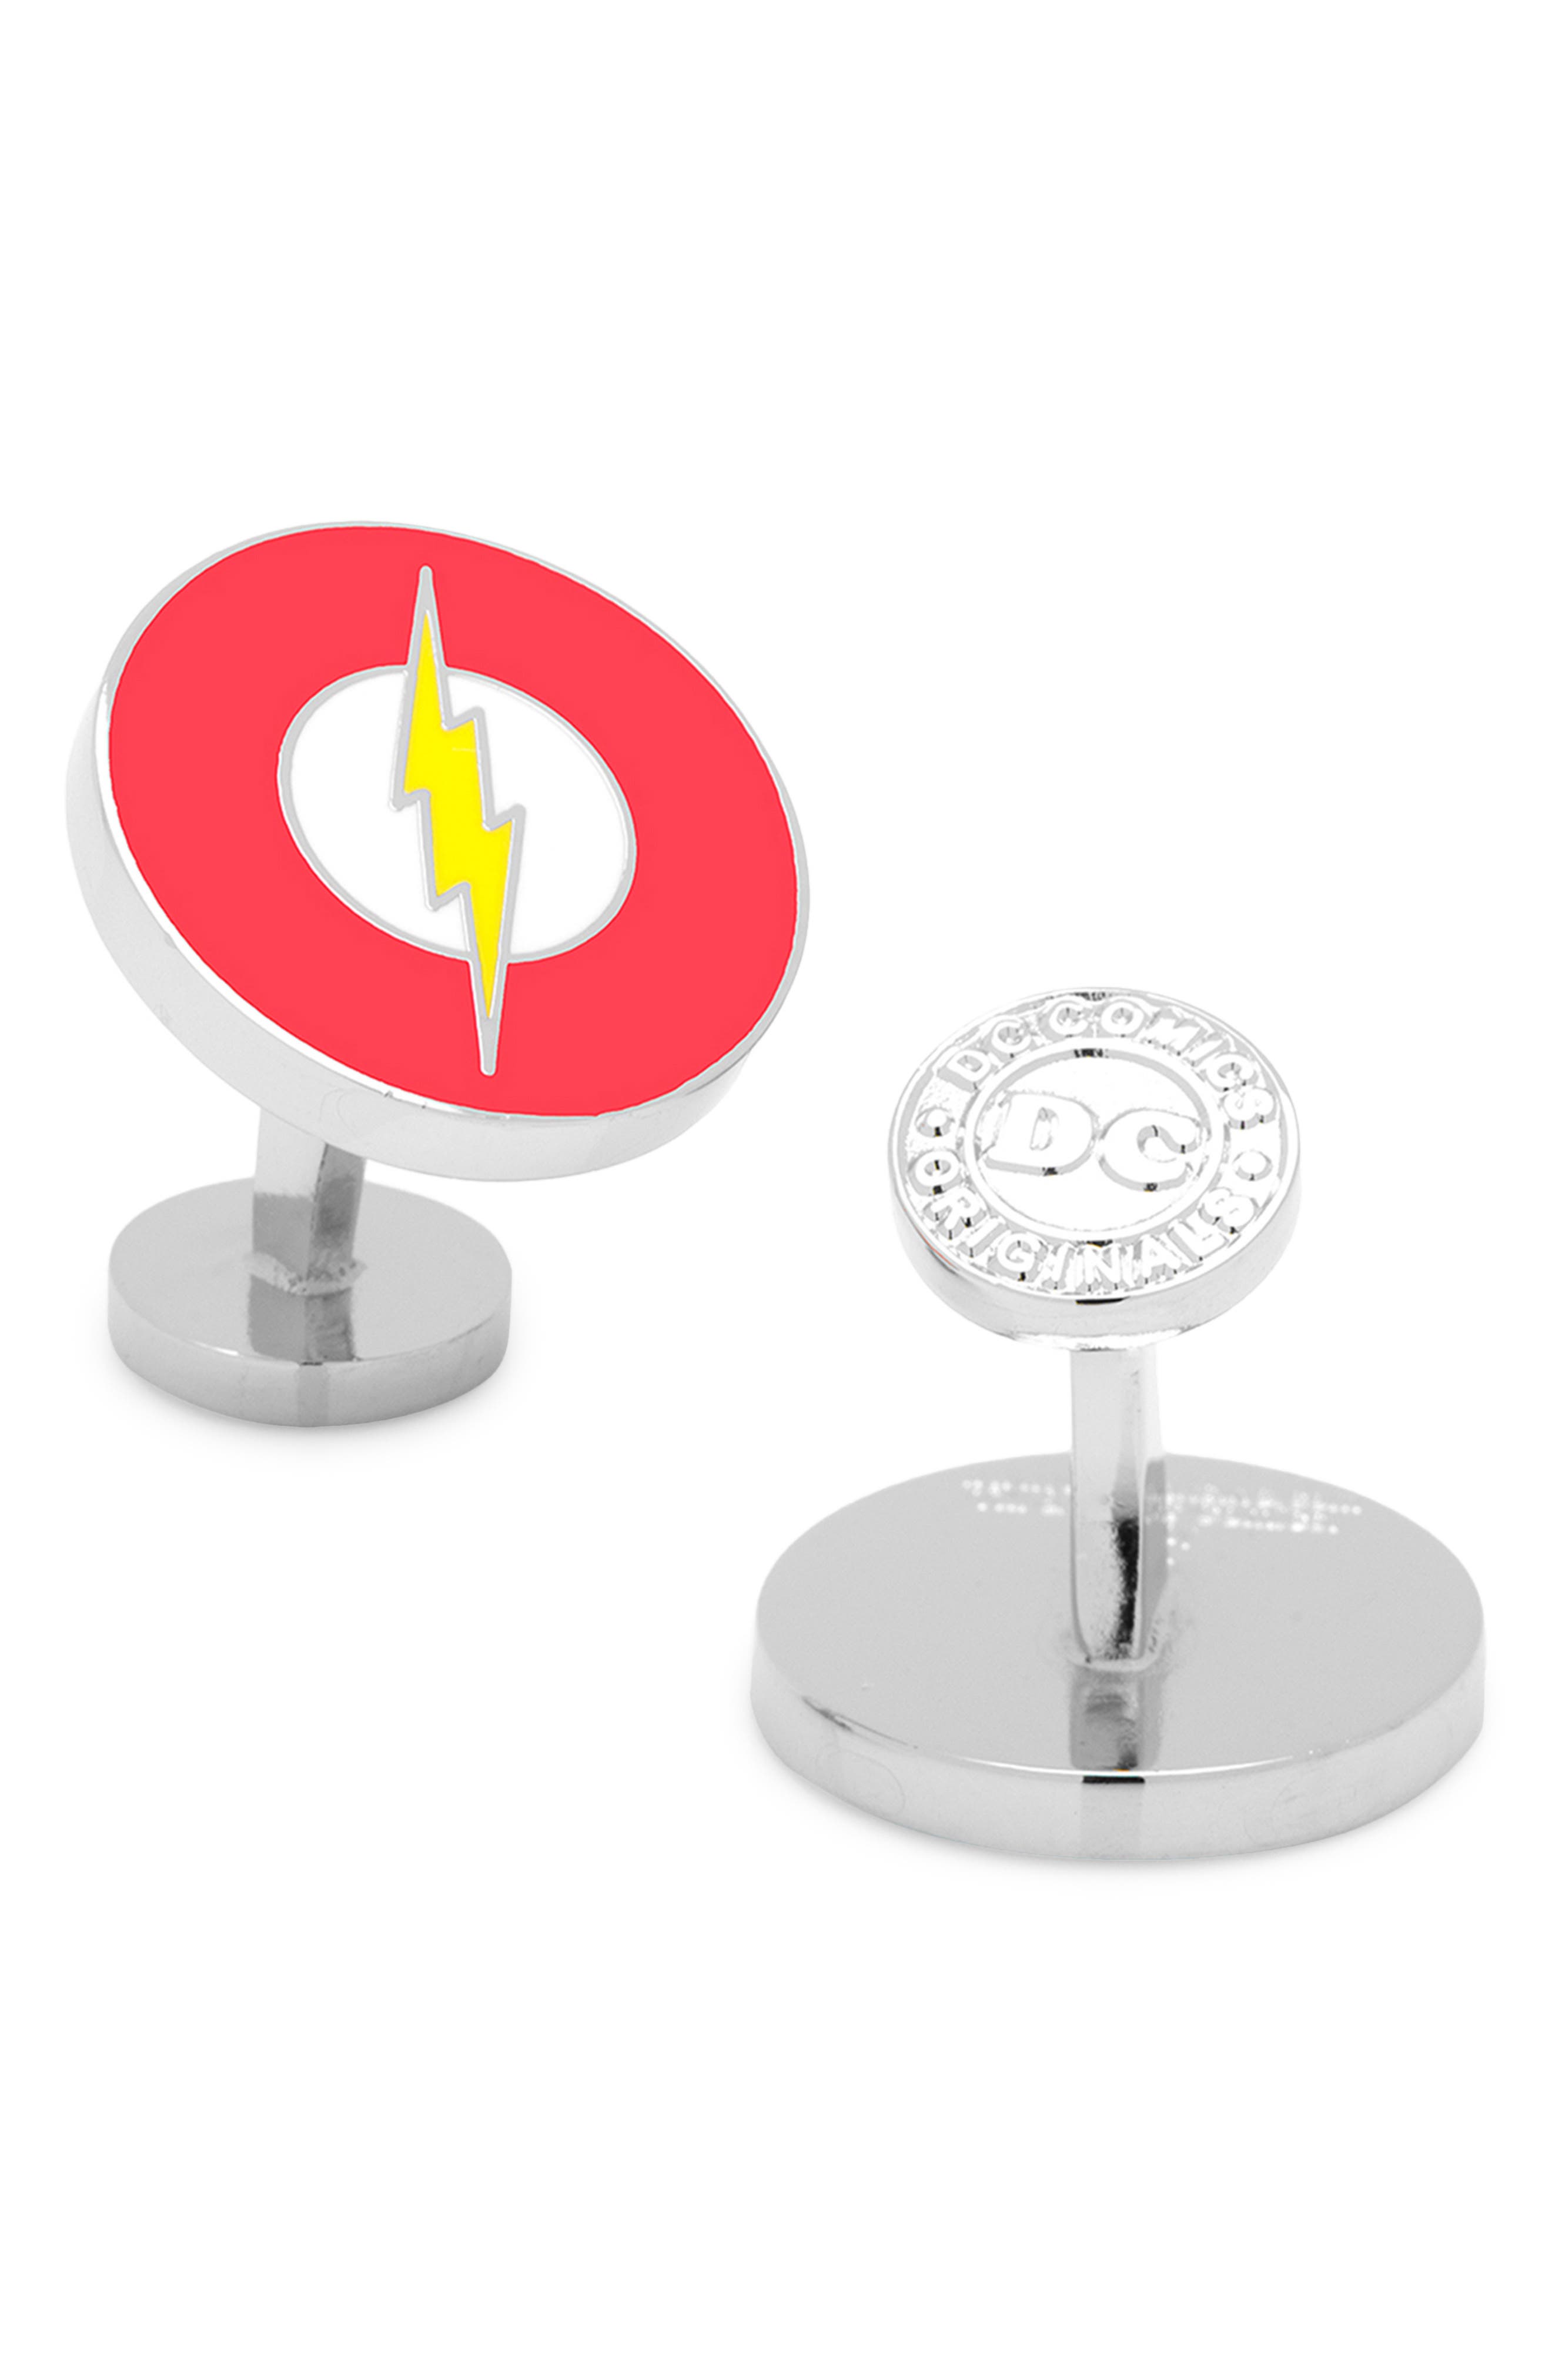 UPC 848873029496 product image for Cufflinks, Inc. Flash Logo Cuff Links in Red at Nordstrom | upcitemdb.com